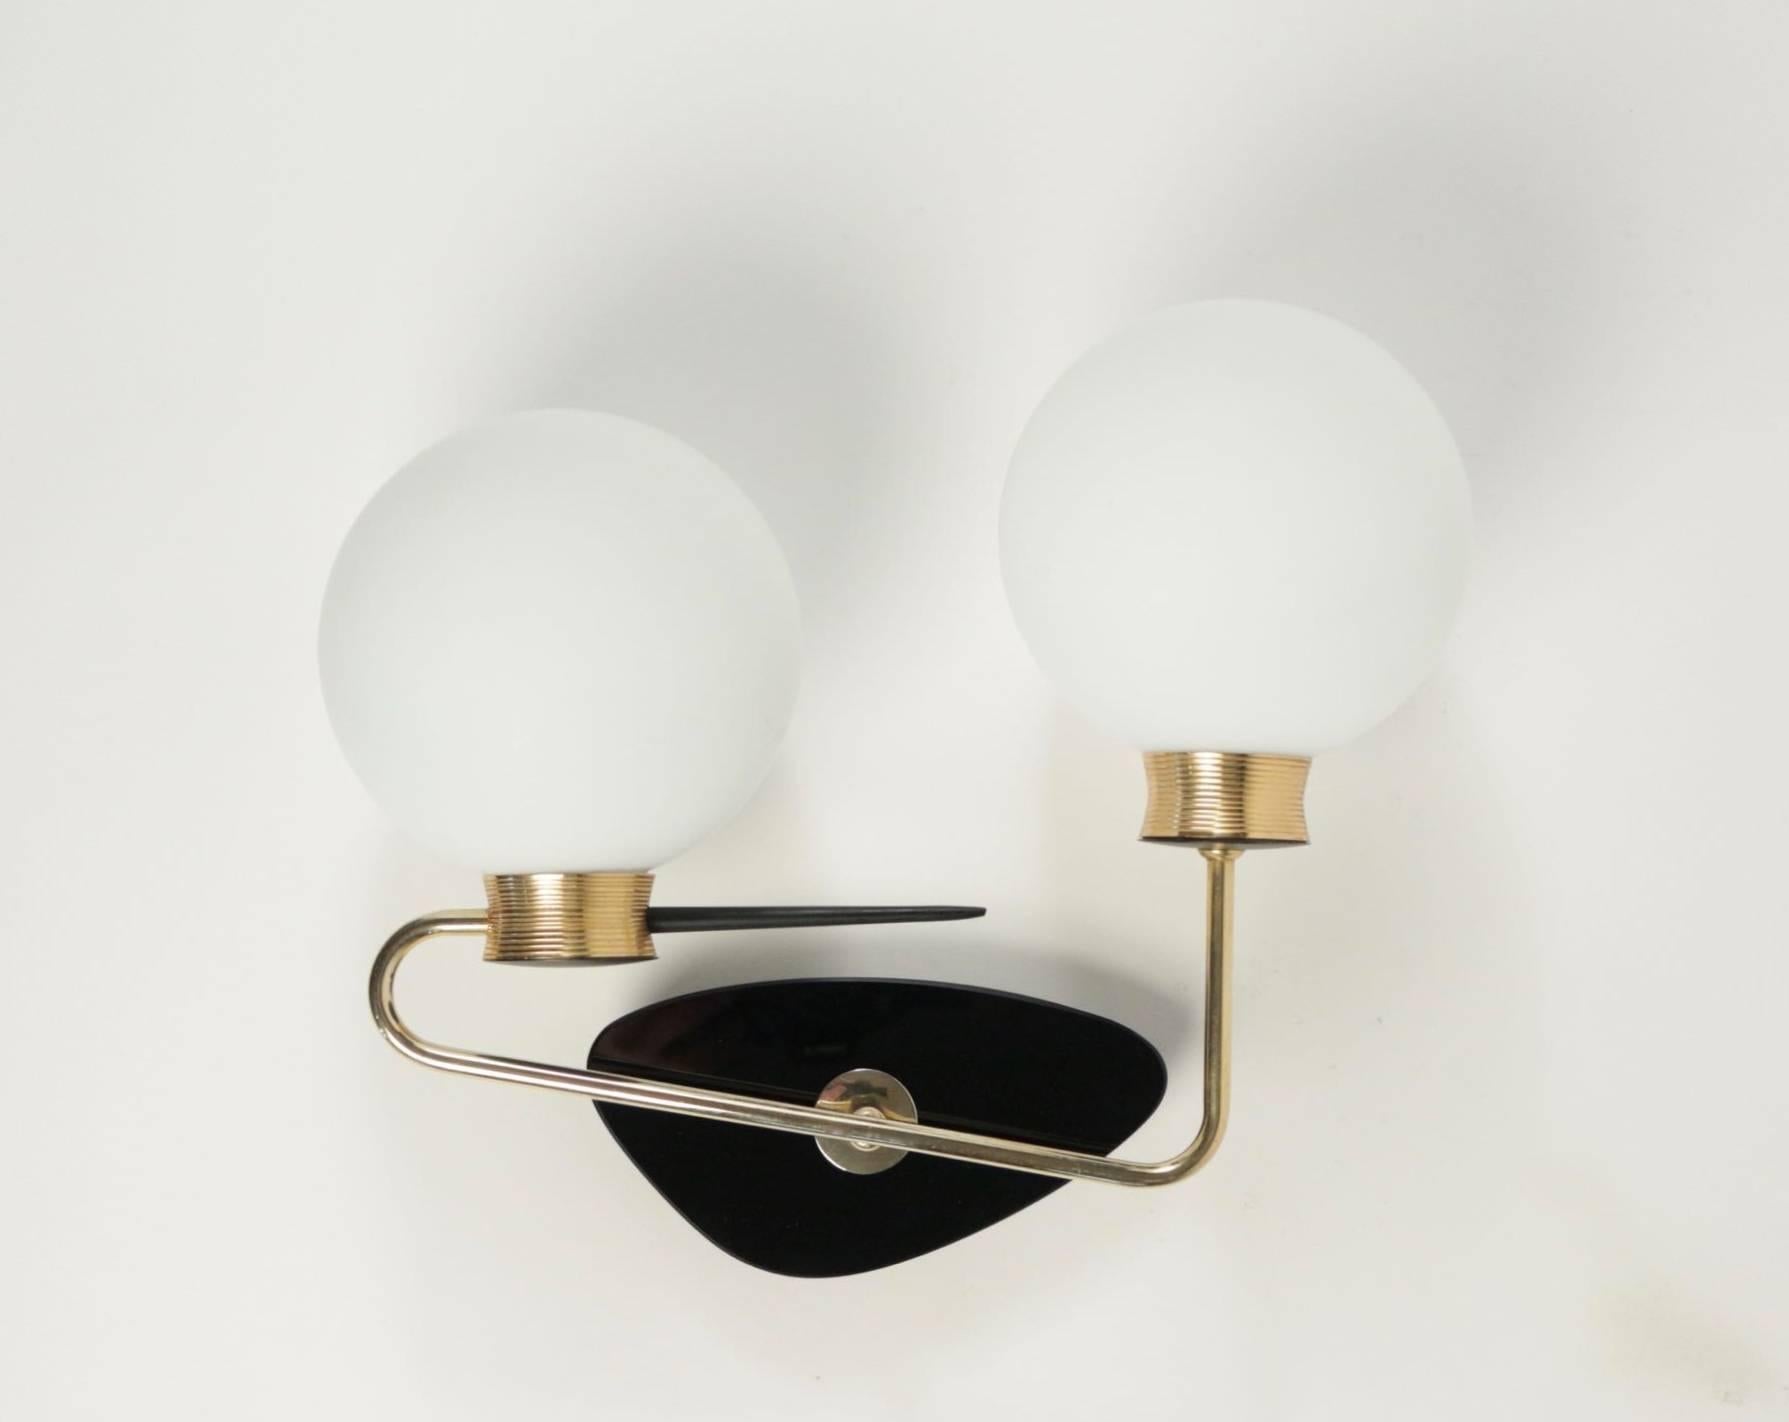 1950s pair of asymmetrical Arlus sconces. 

Ovoid shaped and black lacquered back plate.
Two round white satin glass lampshades mounted on curved brass arm ended by black stem.

Two bulbs per sconce.